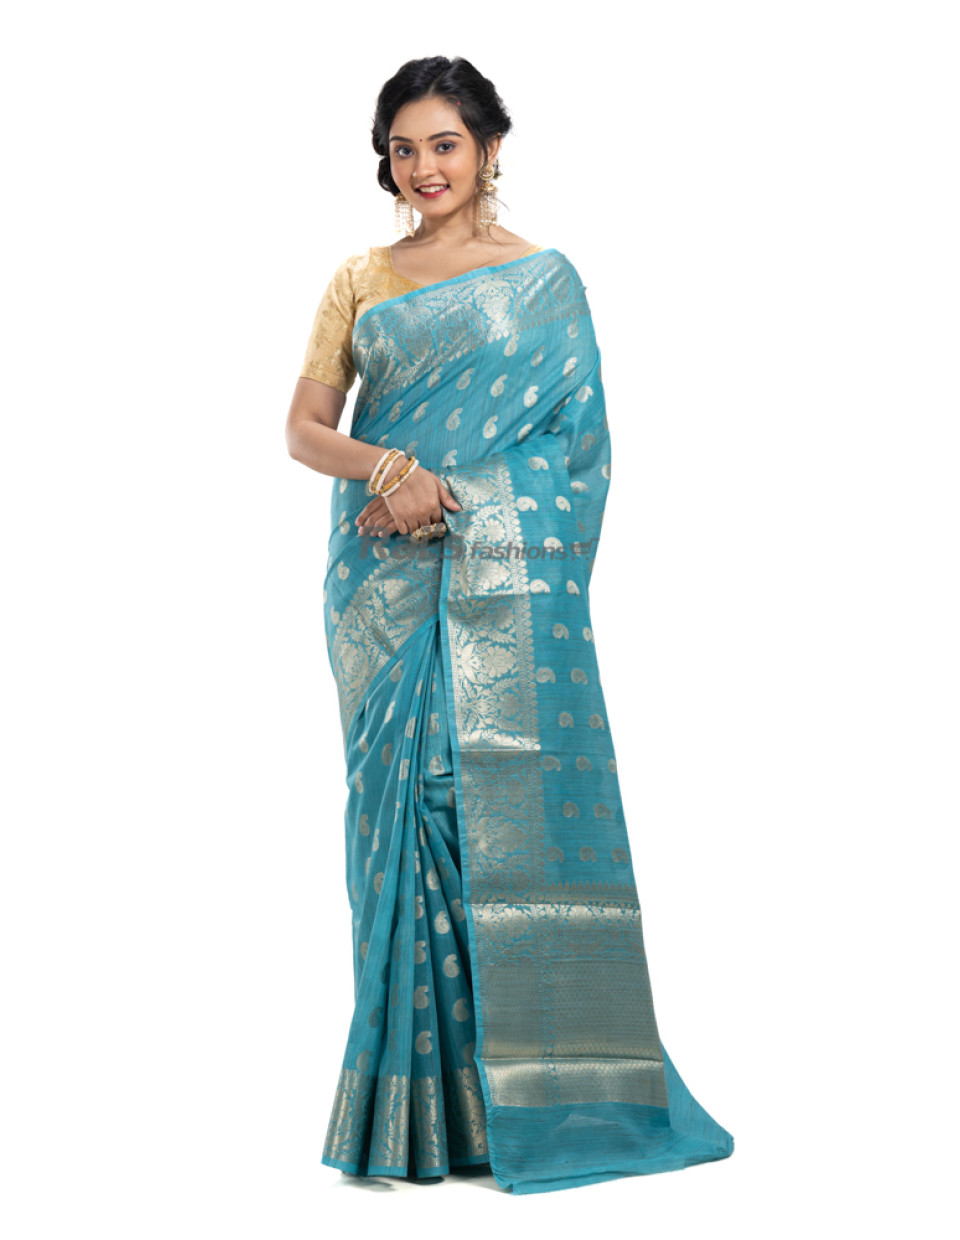 Dupion Silk Cotton Saree With Silver Zari Weaving Butta All Over - And The Border And Pallu Part Traditional Banarasi Weaving Work (KR2136)